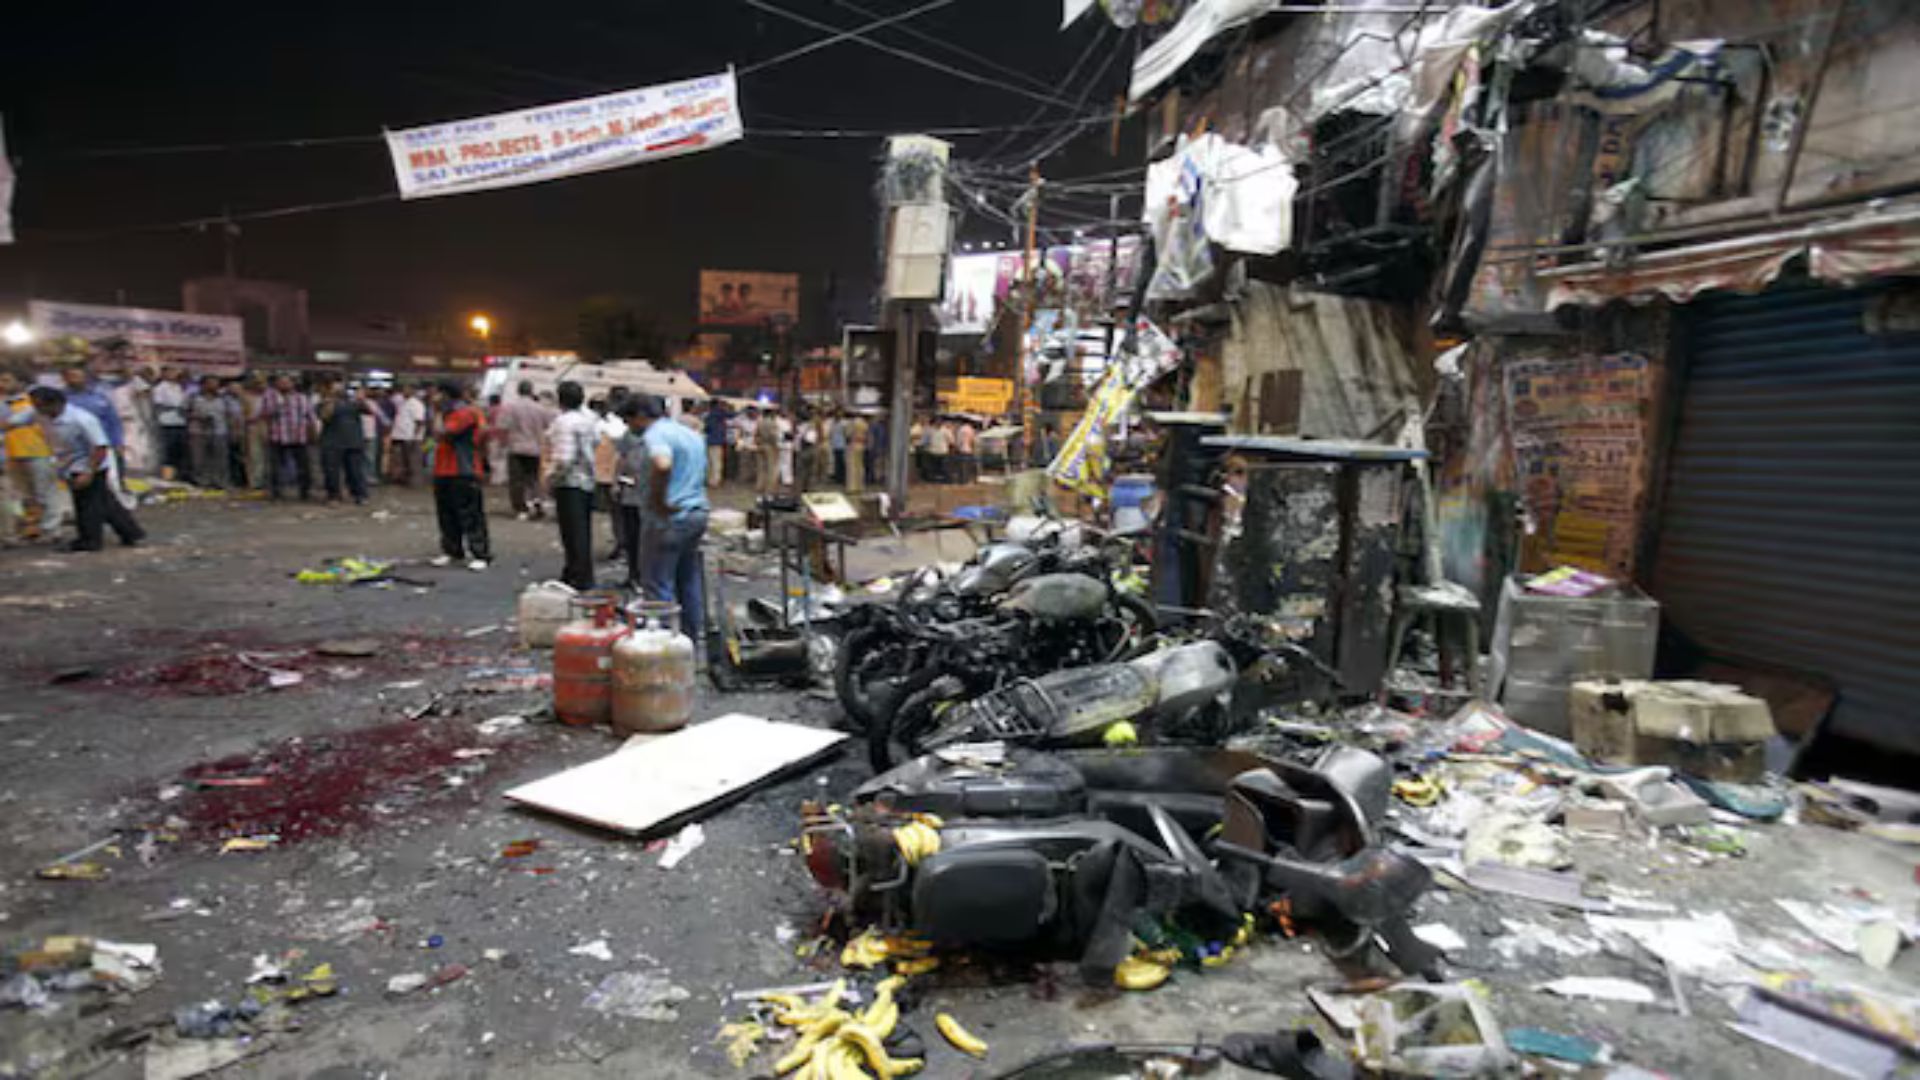 Deadly Blast in Hyderabad, Pakistan Claims 12 Lives